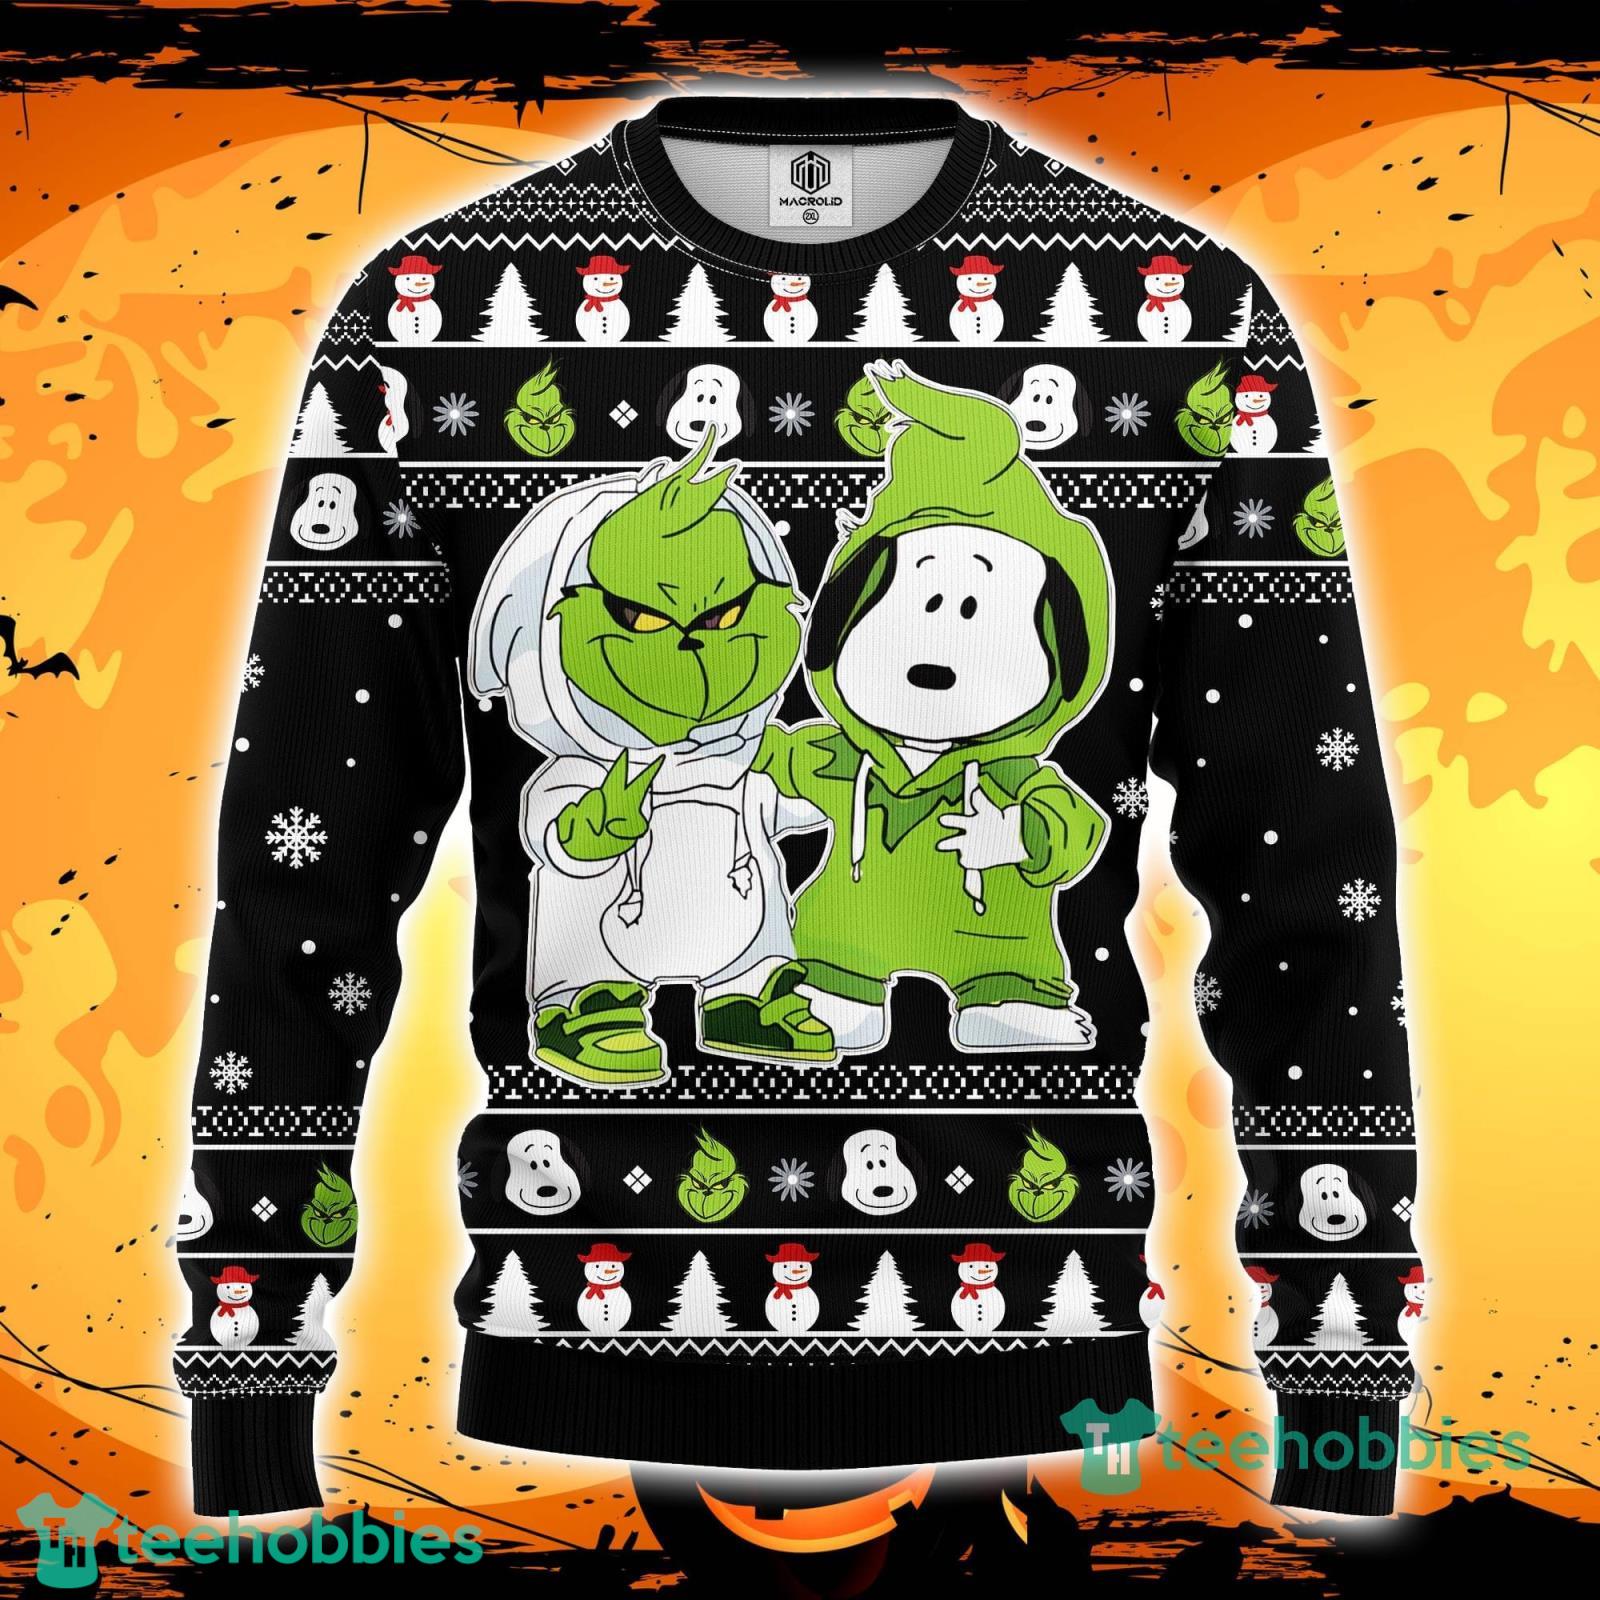 https://image.teehobbies.us/2023/08/grinch-and-snoopy-ugly-christmas-sweater-amazing-gift-men-and-women-cute-christmas-gift.jpg